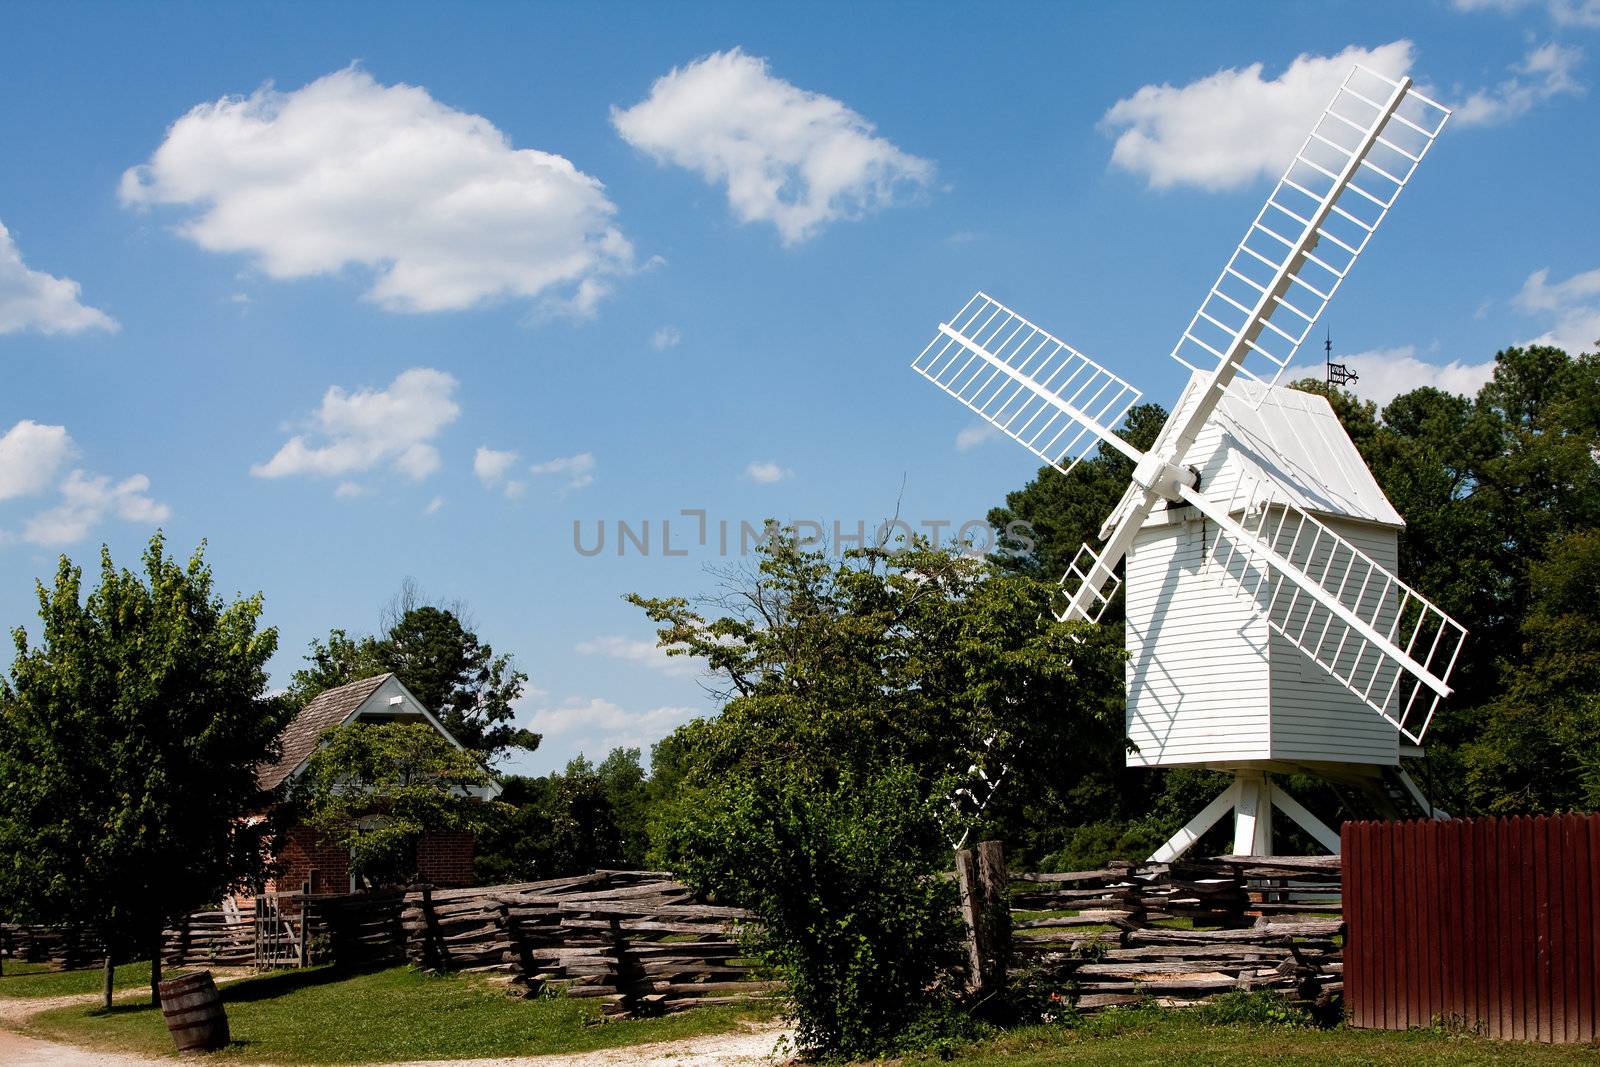 A white wooden windmill in a small meadow behind a wooden fence on a summer day with blue skies surrounded by trees in Colonial Williamsburg, Virginia.